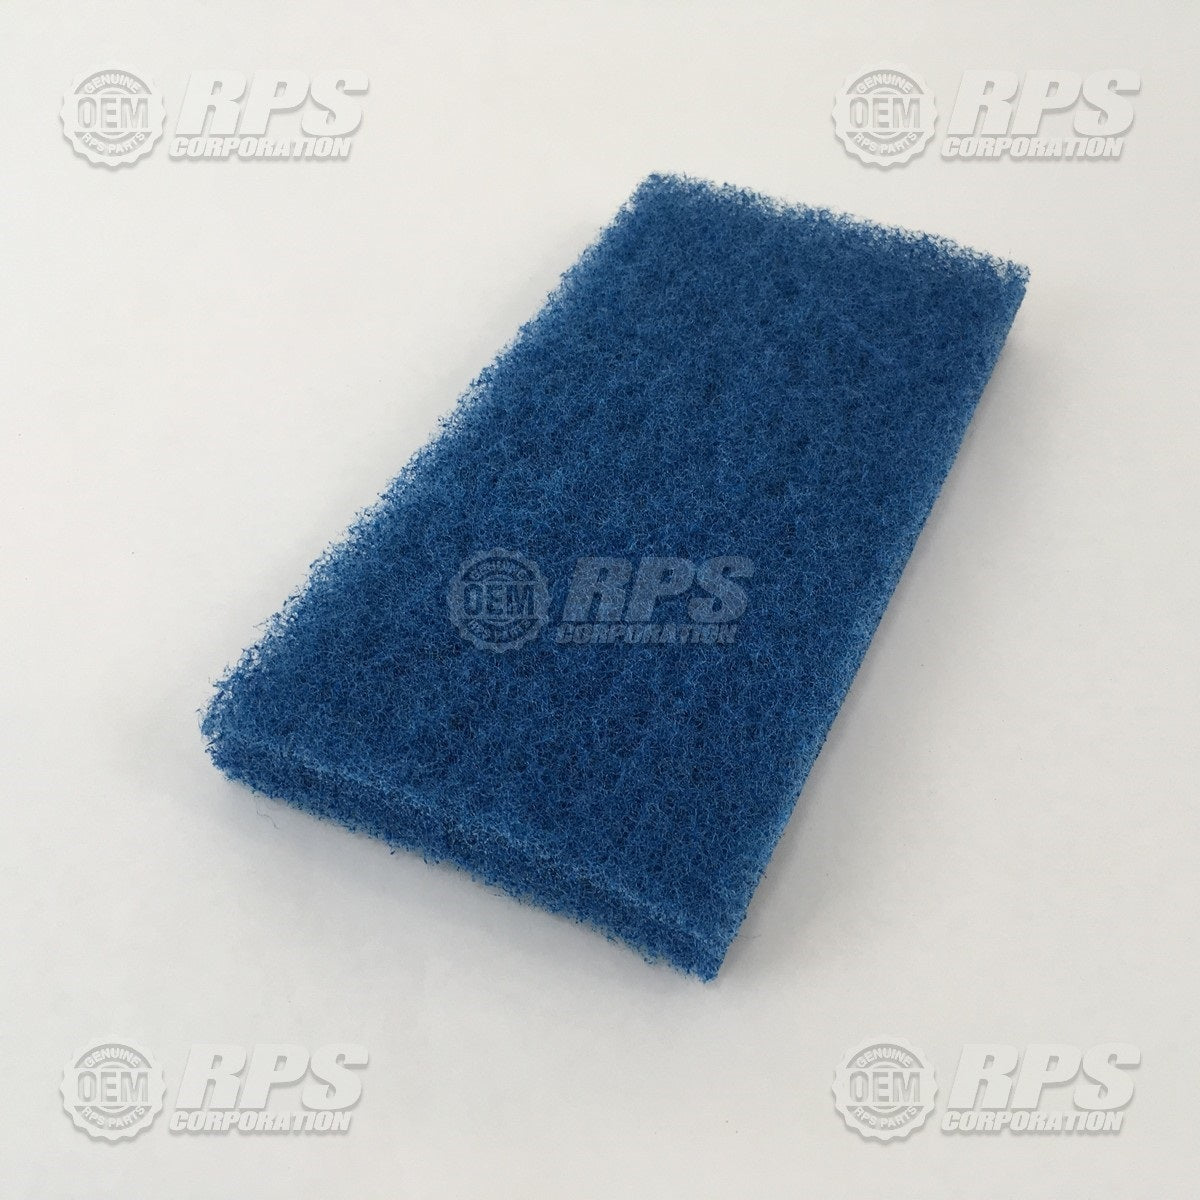 Timberline 10.5 Inch Blue Pads (Box of 18)